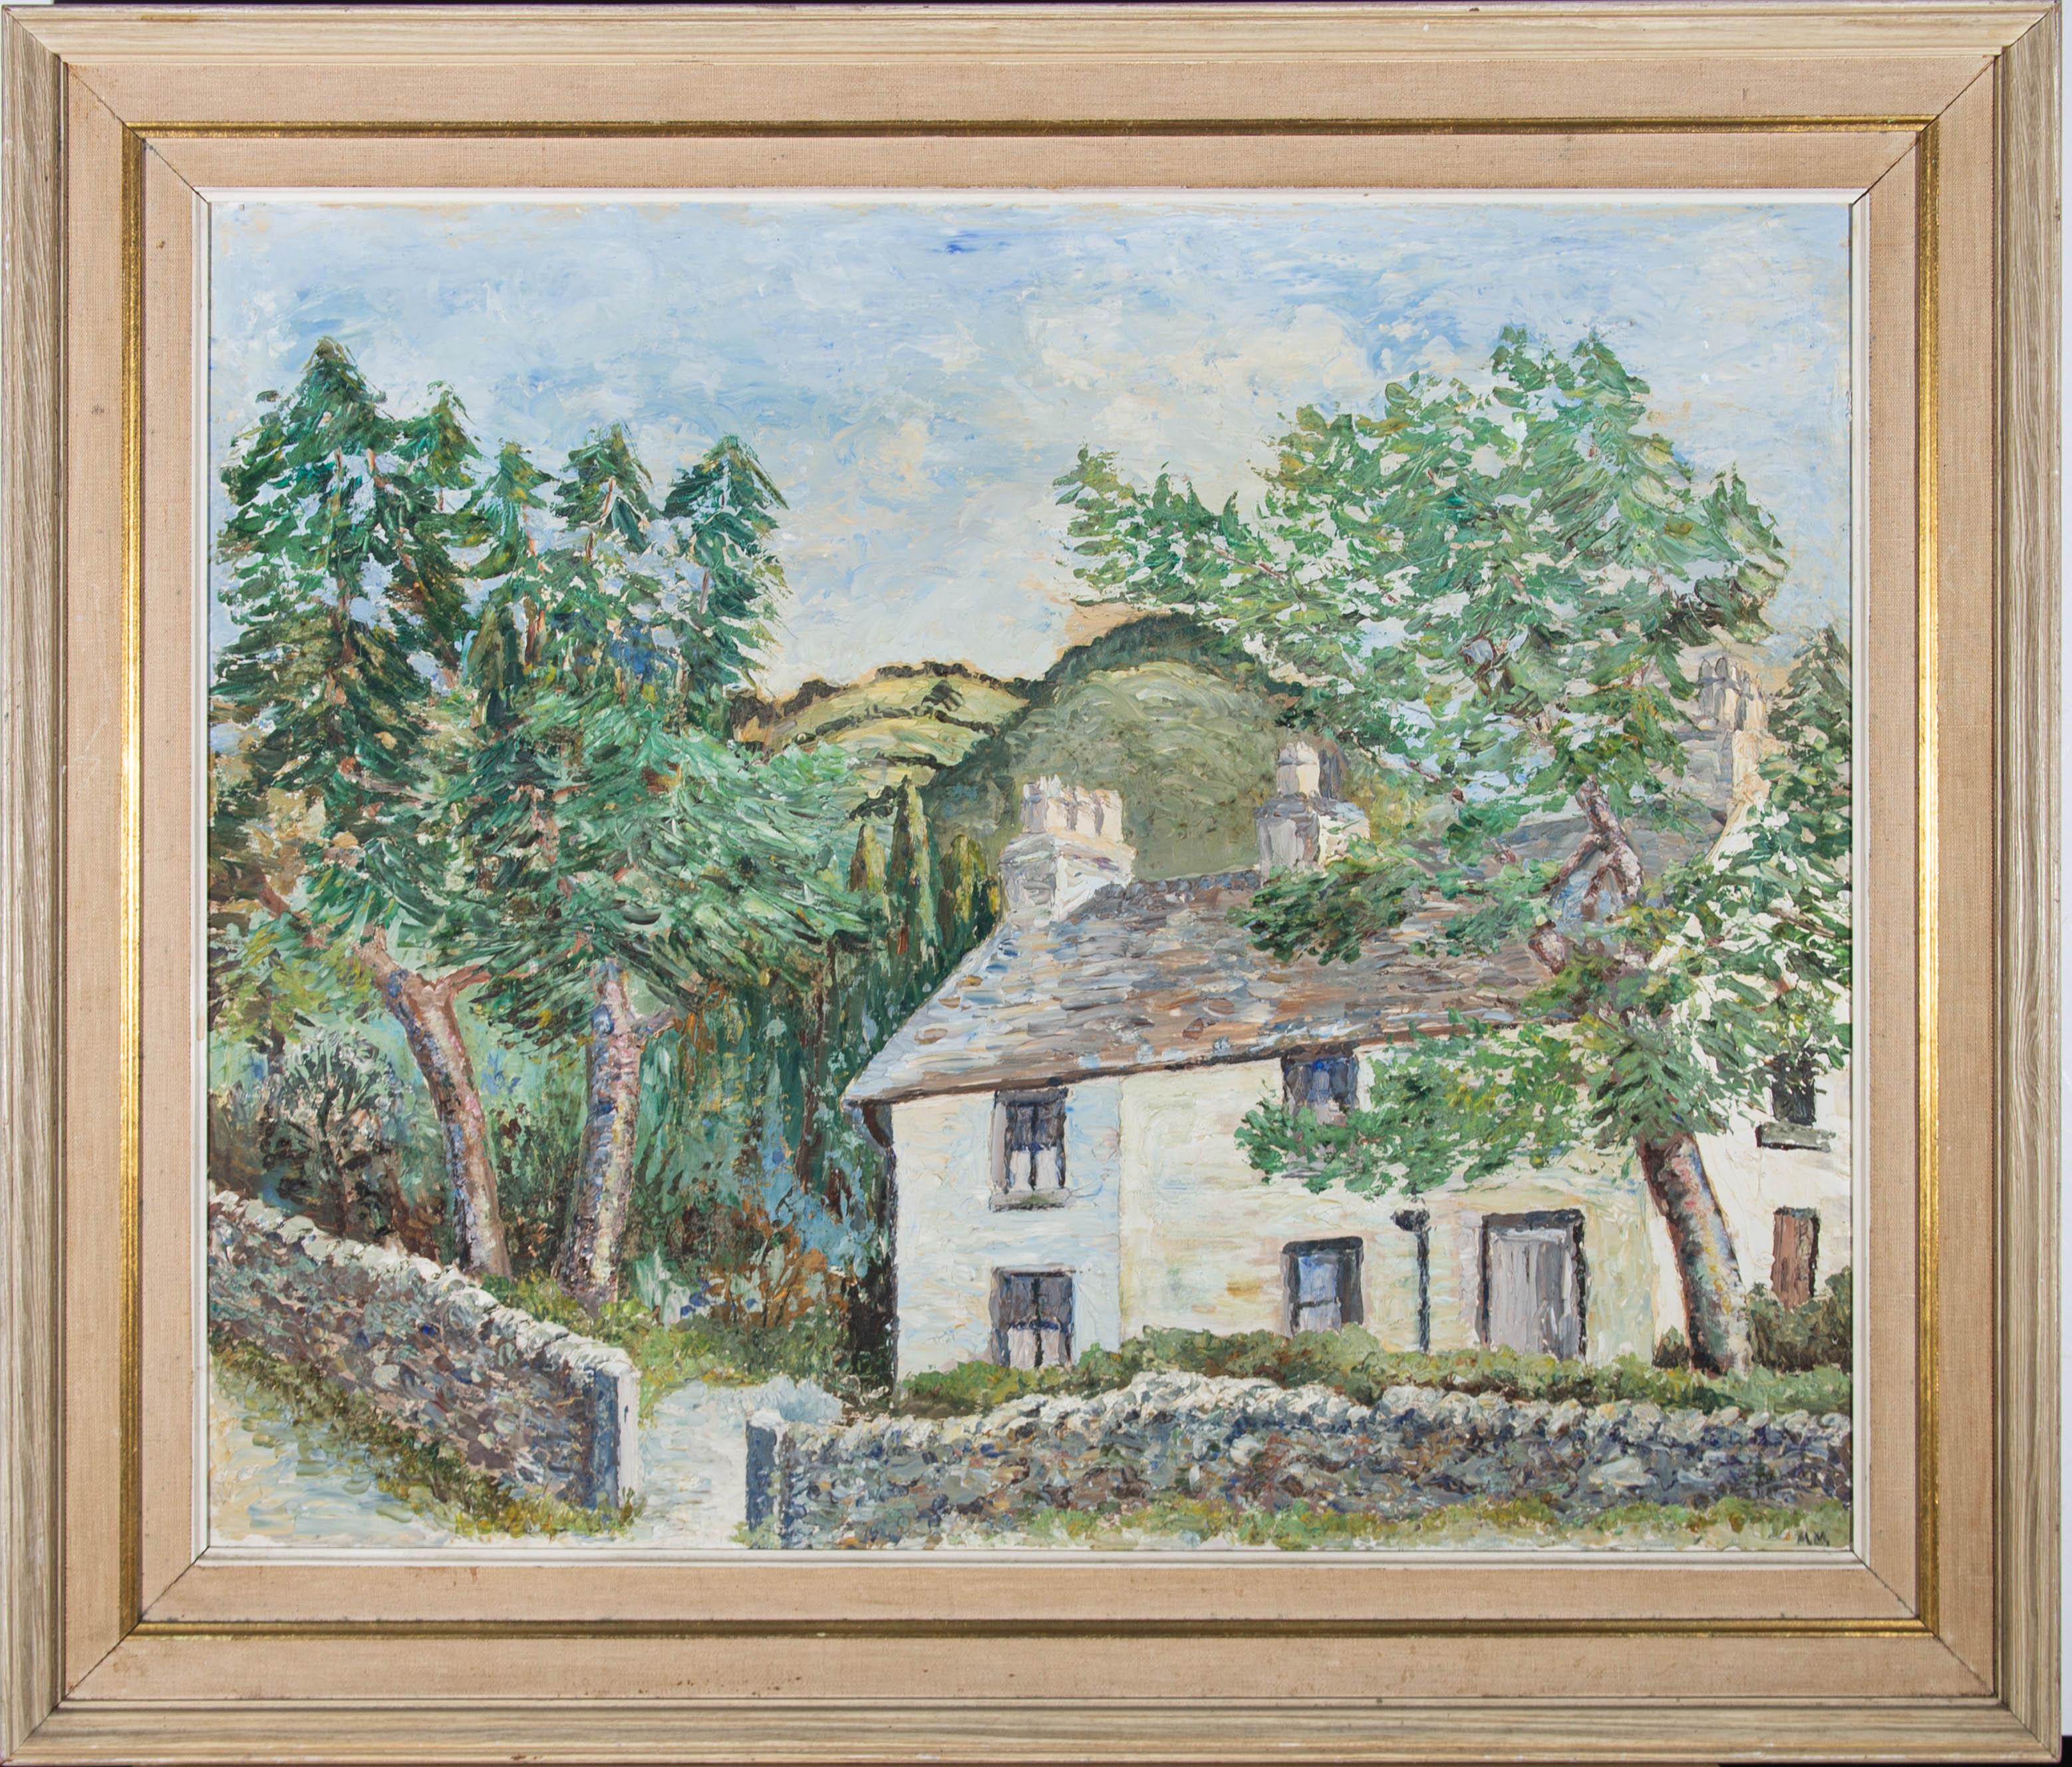 A charmingly rustic oil scene in an impasto impressionistic style, showing a stone cottage nestled among trees at the foot of a hillside. The artist has initialed to the lower right corner and the painting has been presented in an off-white frame